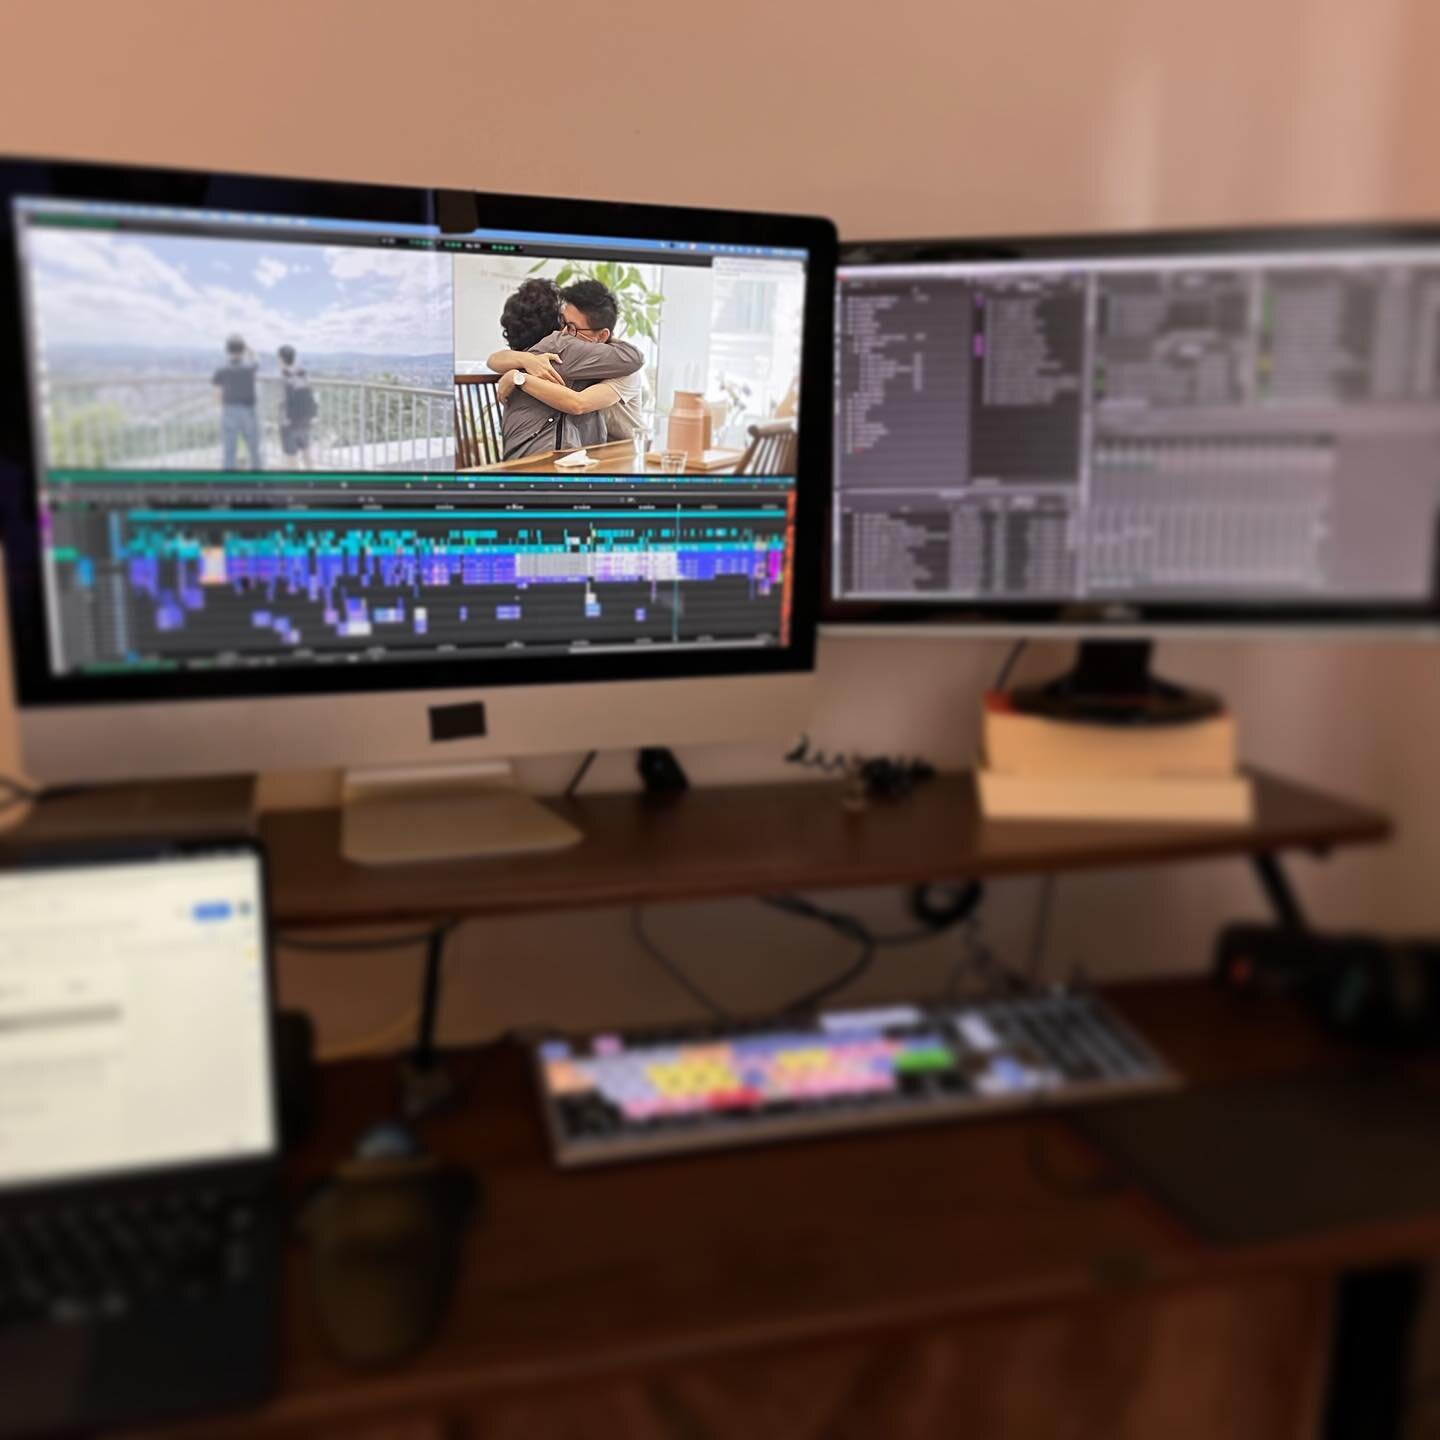 We're thrilled to share that Between Goodbyes is now in Post Production!

🎥 🎞 🍿

We've started the editing process with Michelle Chang 🙌 an incredibly talented editor who also keeps zoom calls interesting (swipe to end) 🤪

More updates to come l